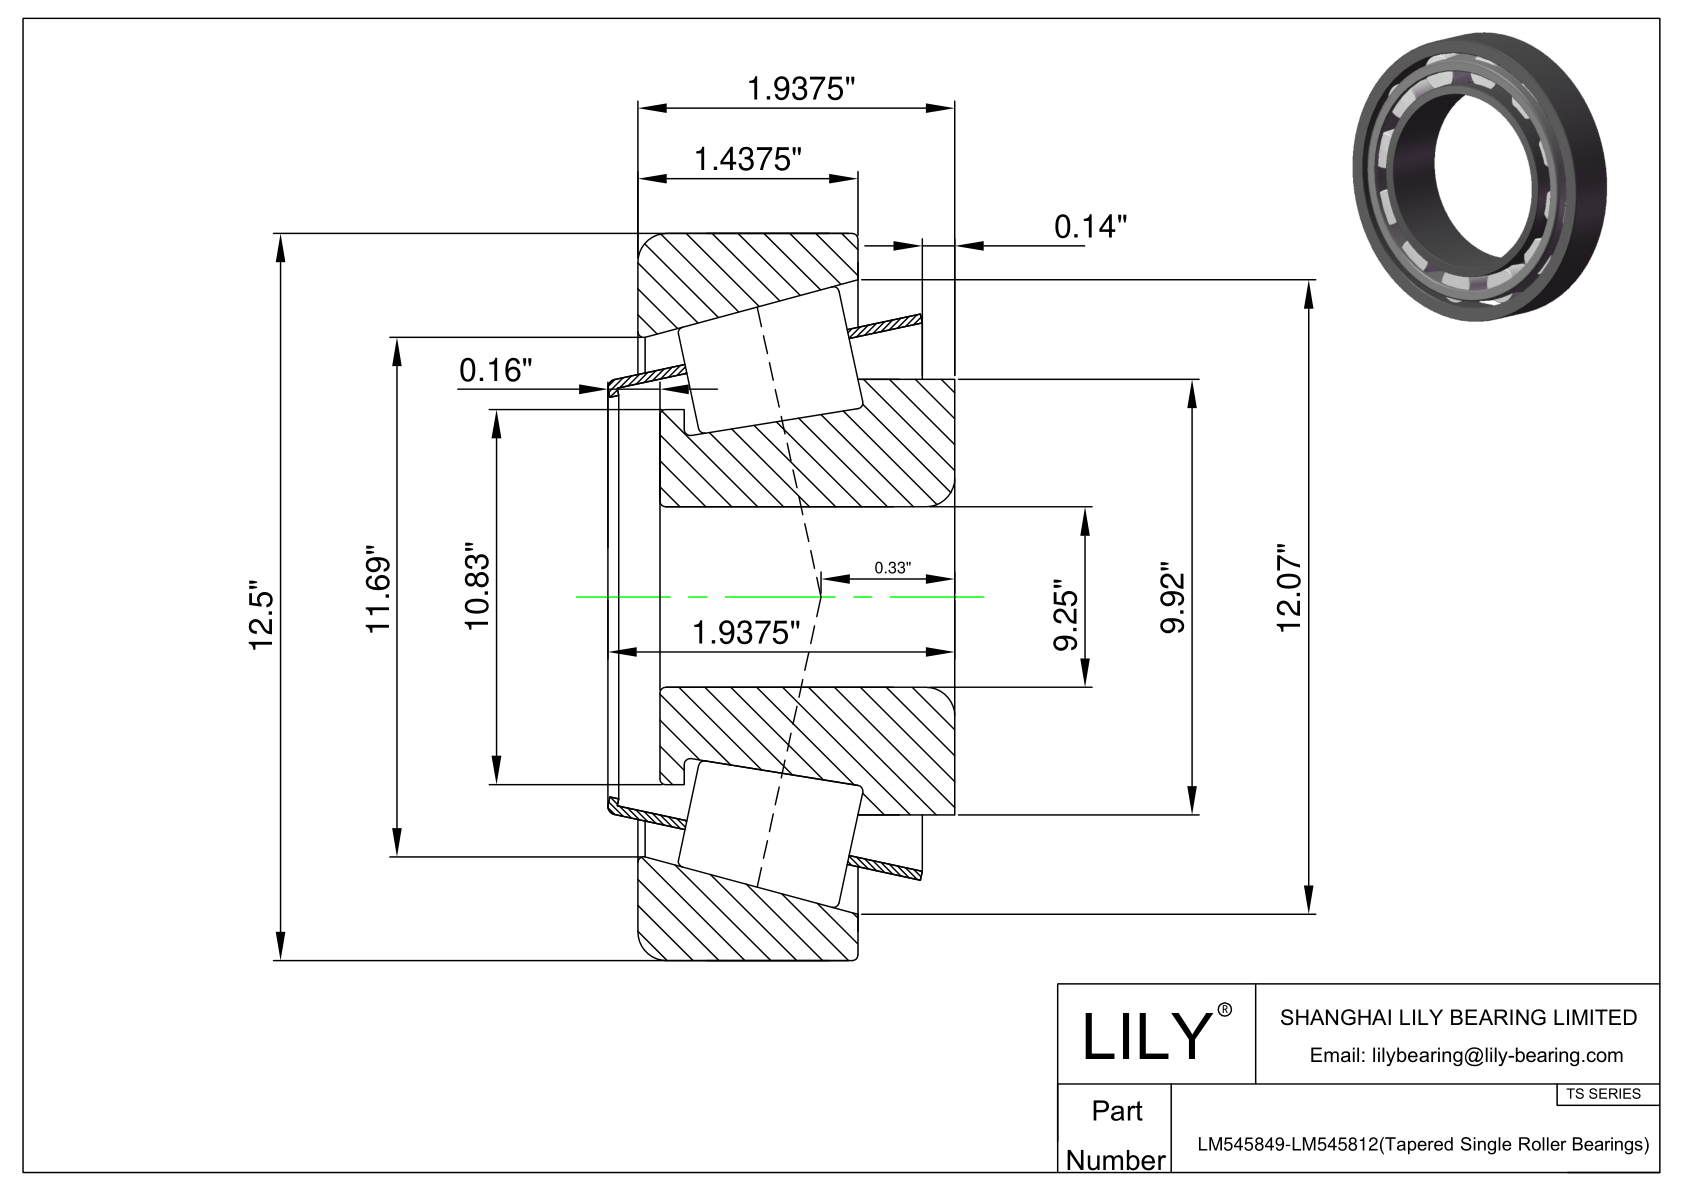 LM545849-LM545812 TS (Tapered Single Roller Bearings) (Imperial) cad drawing